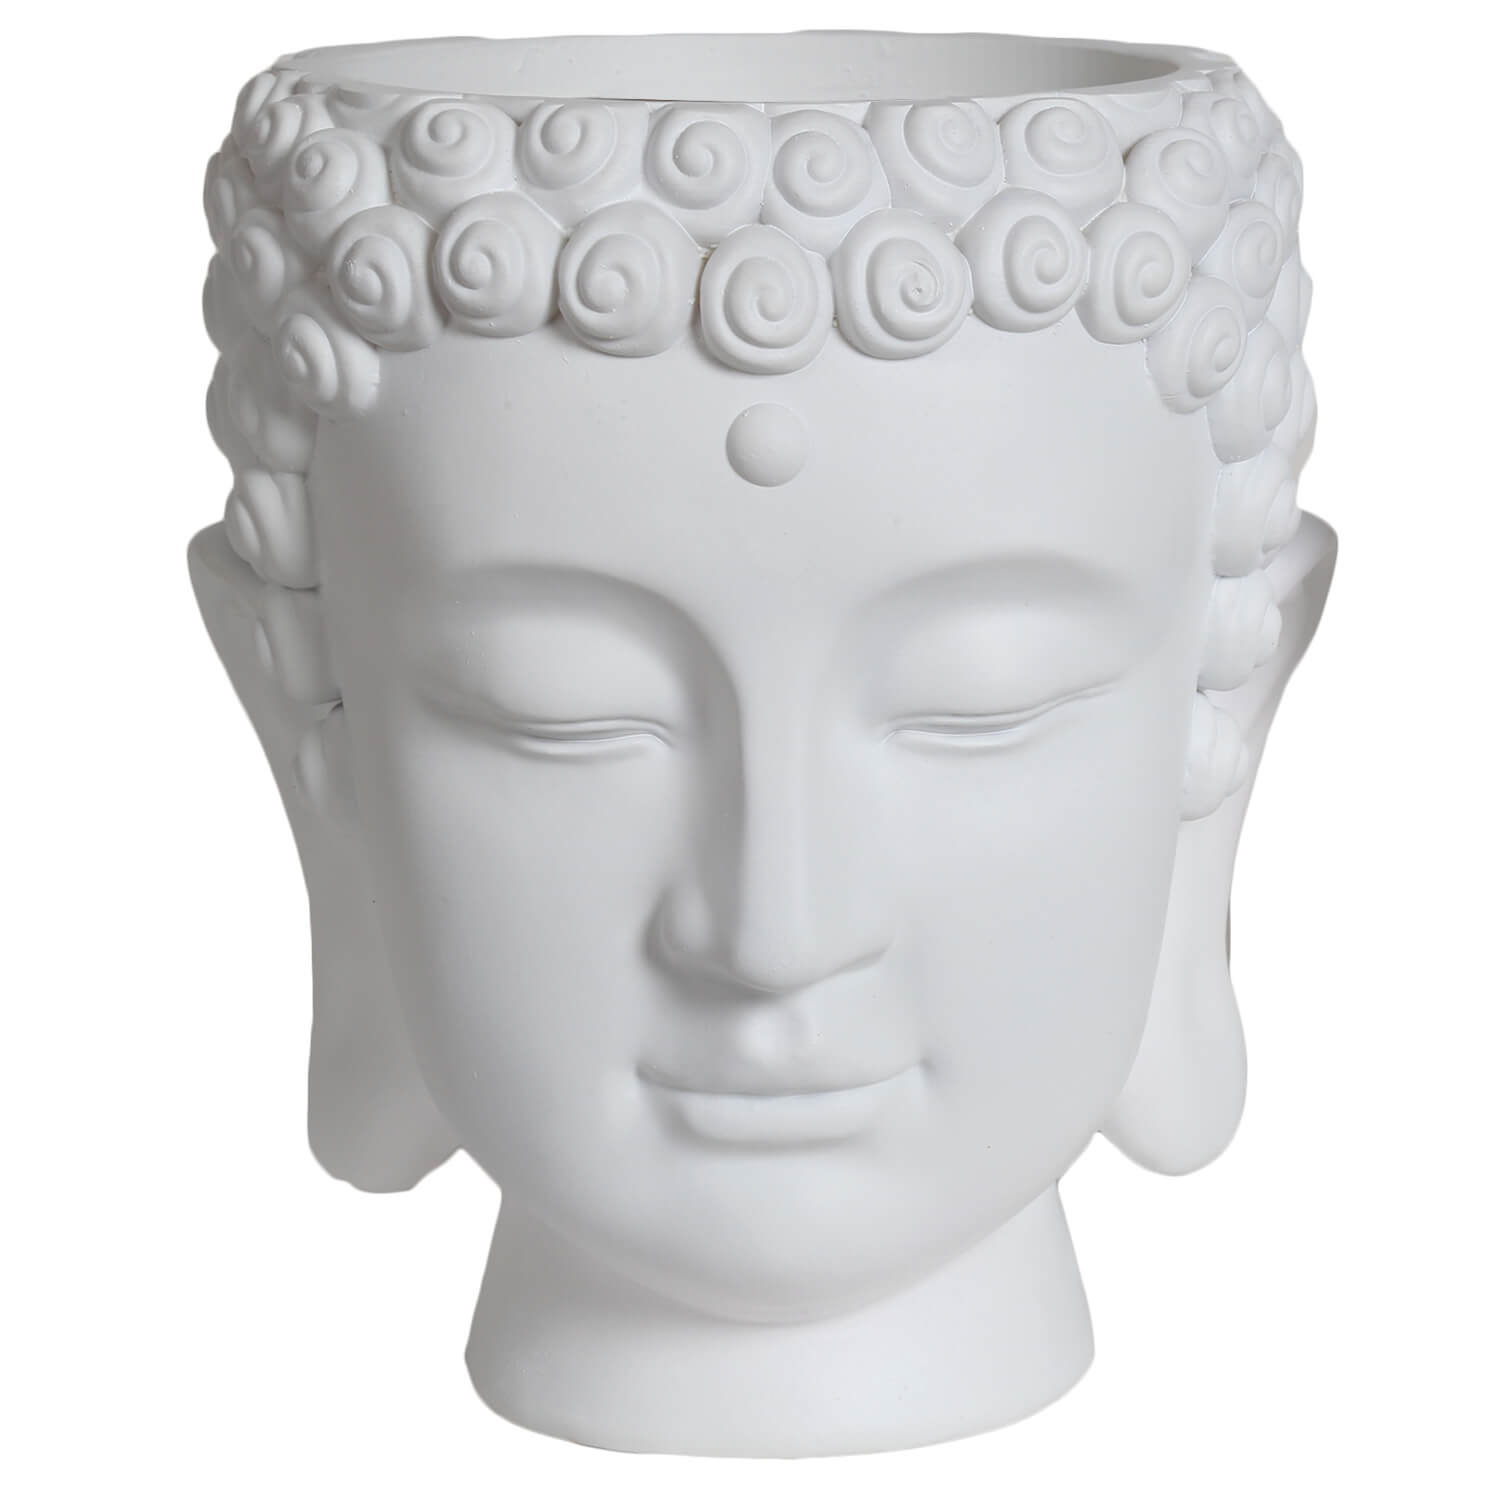 The Home Buddah Planter - 24cm 1 Shaws Department Stores